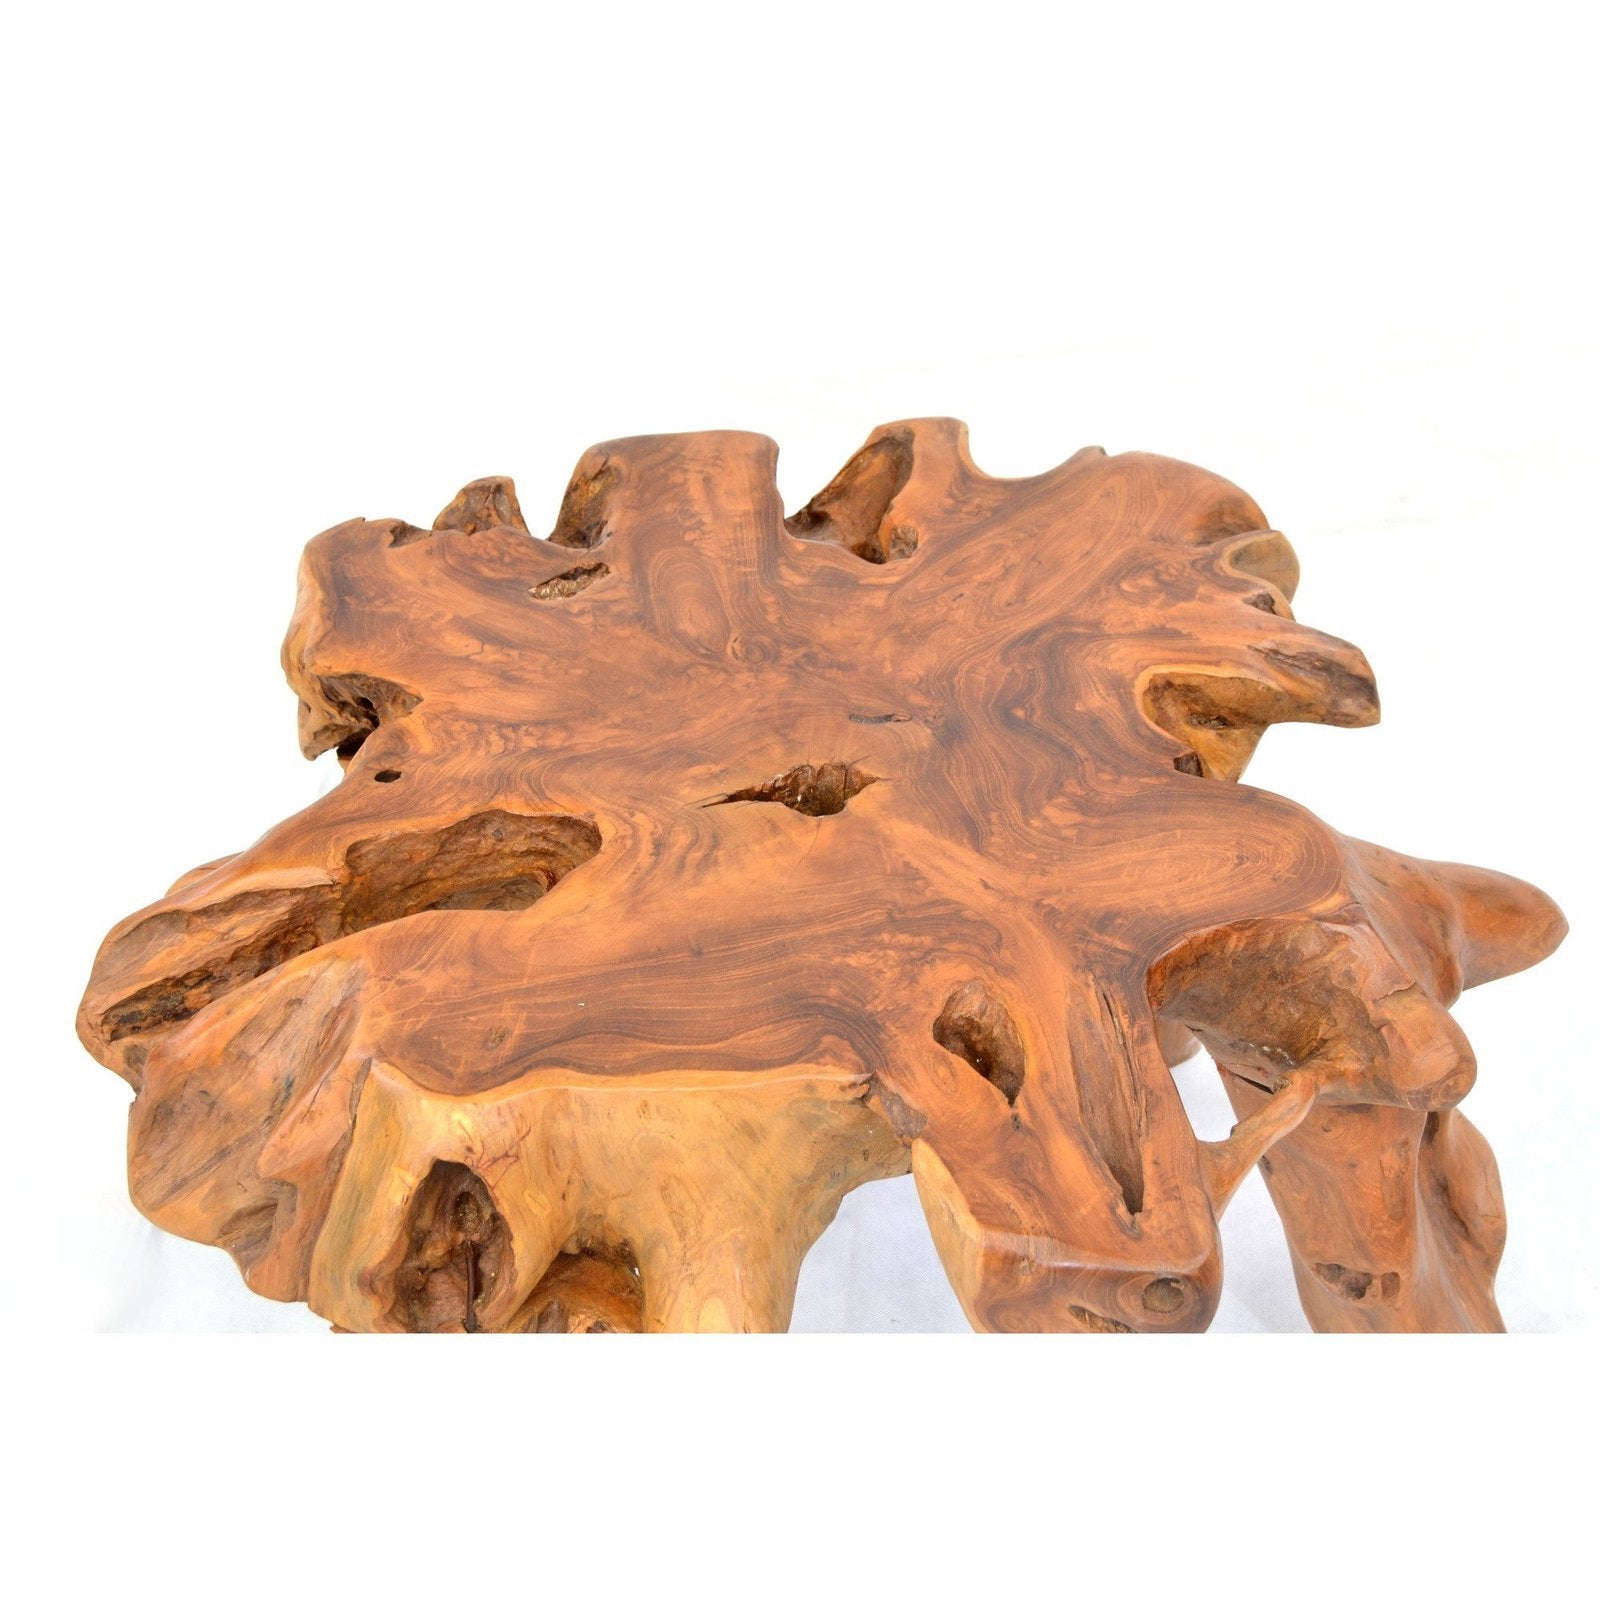 Small Tree Root Coffee Table